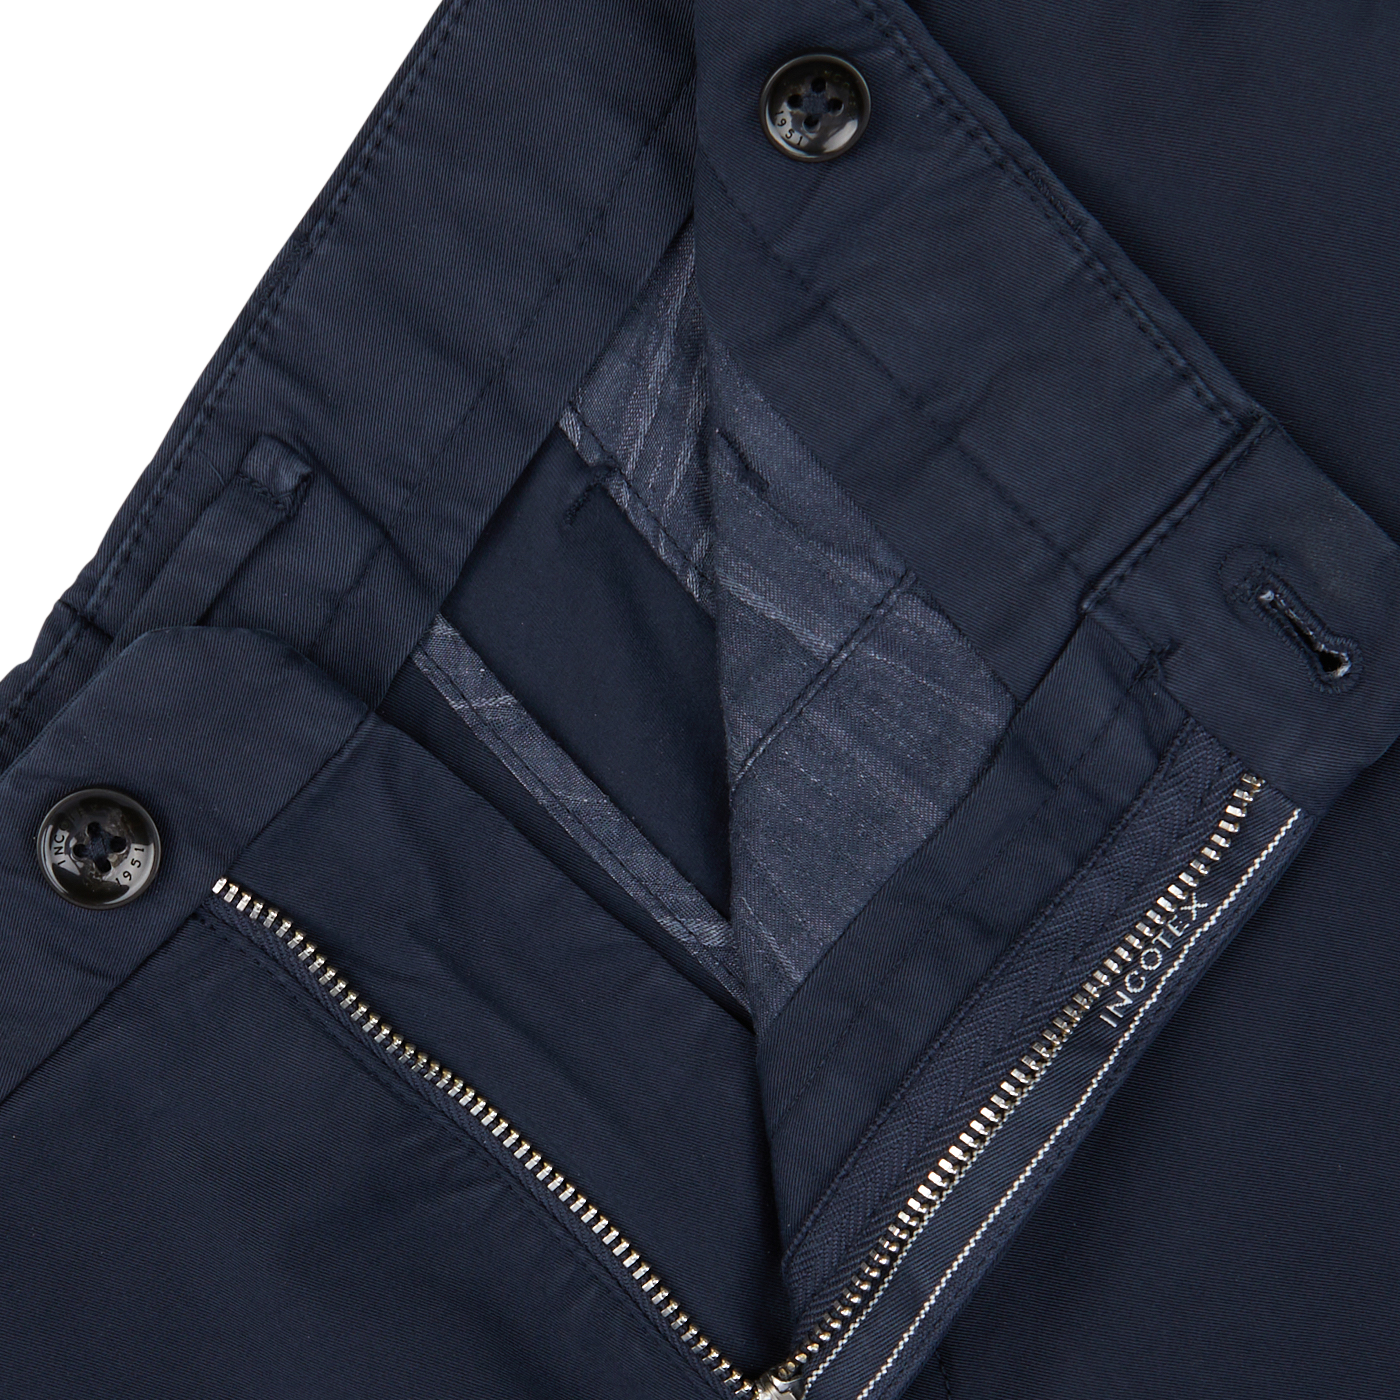 Close-up of Incotex navy blue cotton high comfort shorts with a zipper and button details.